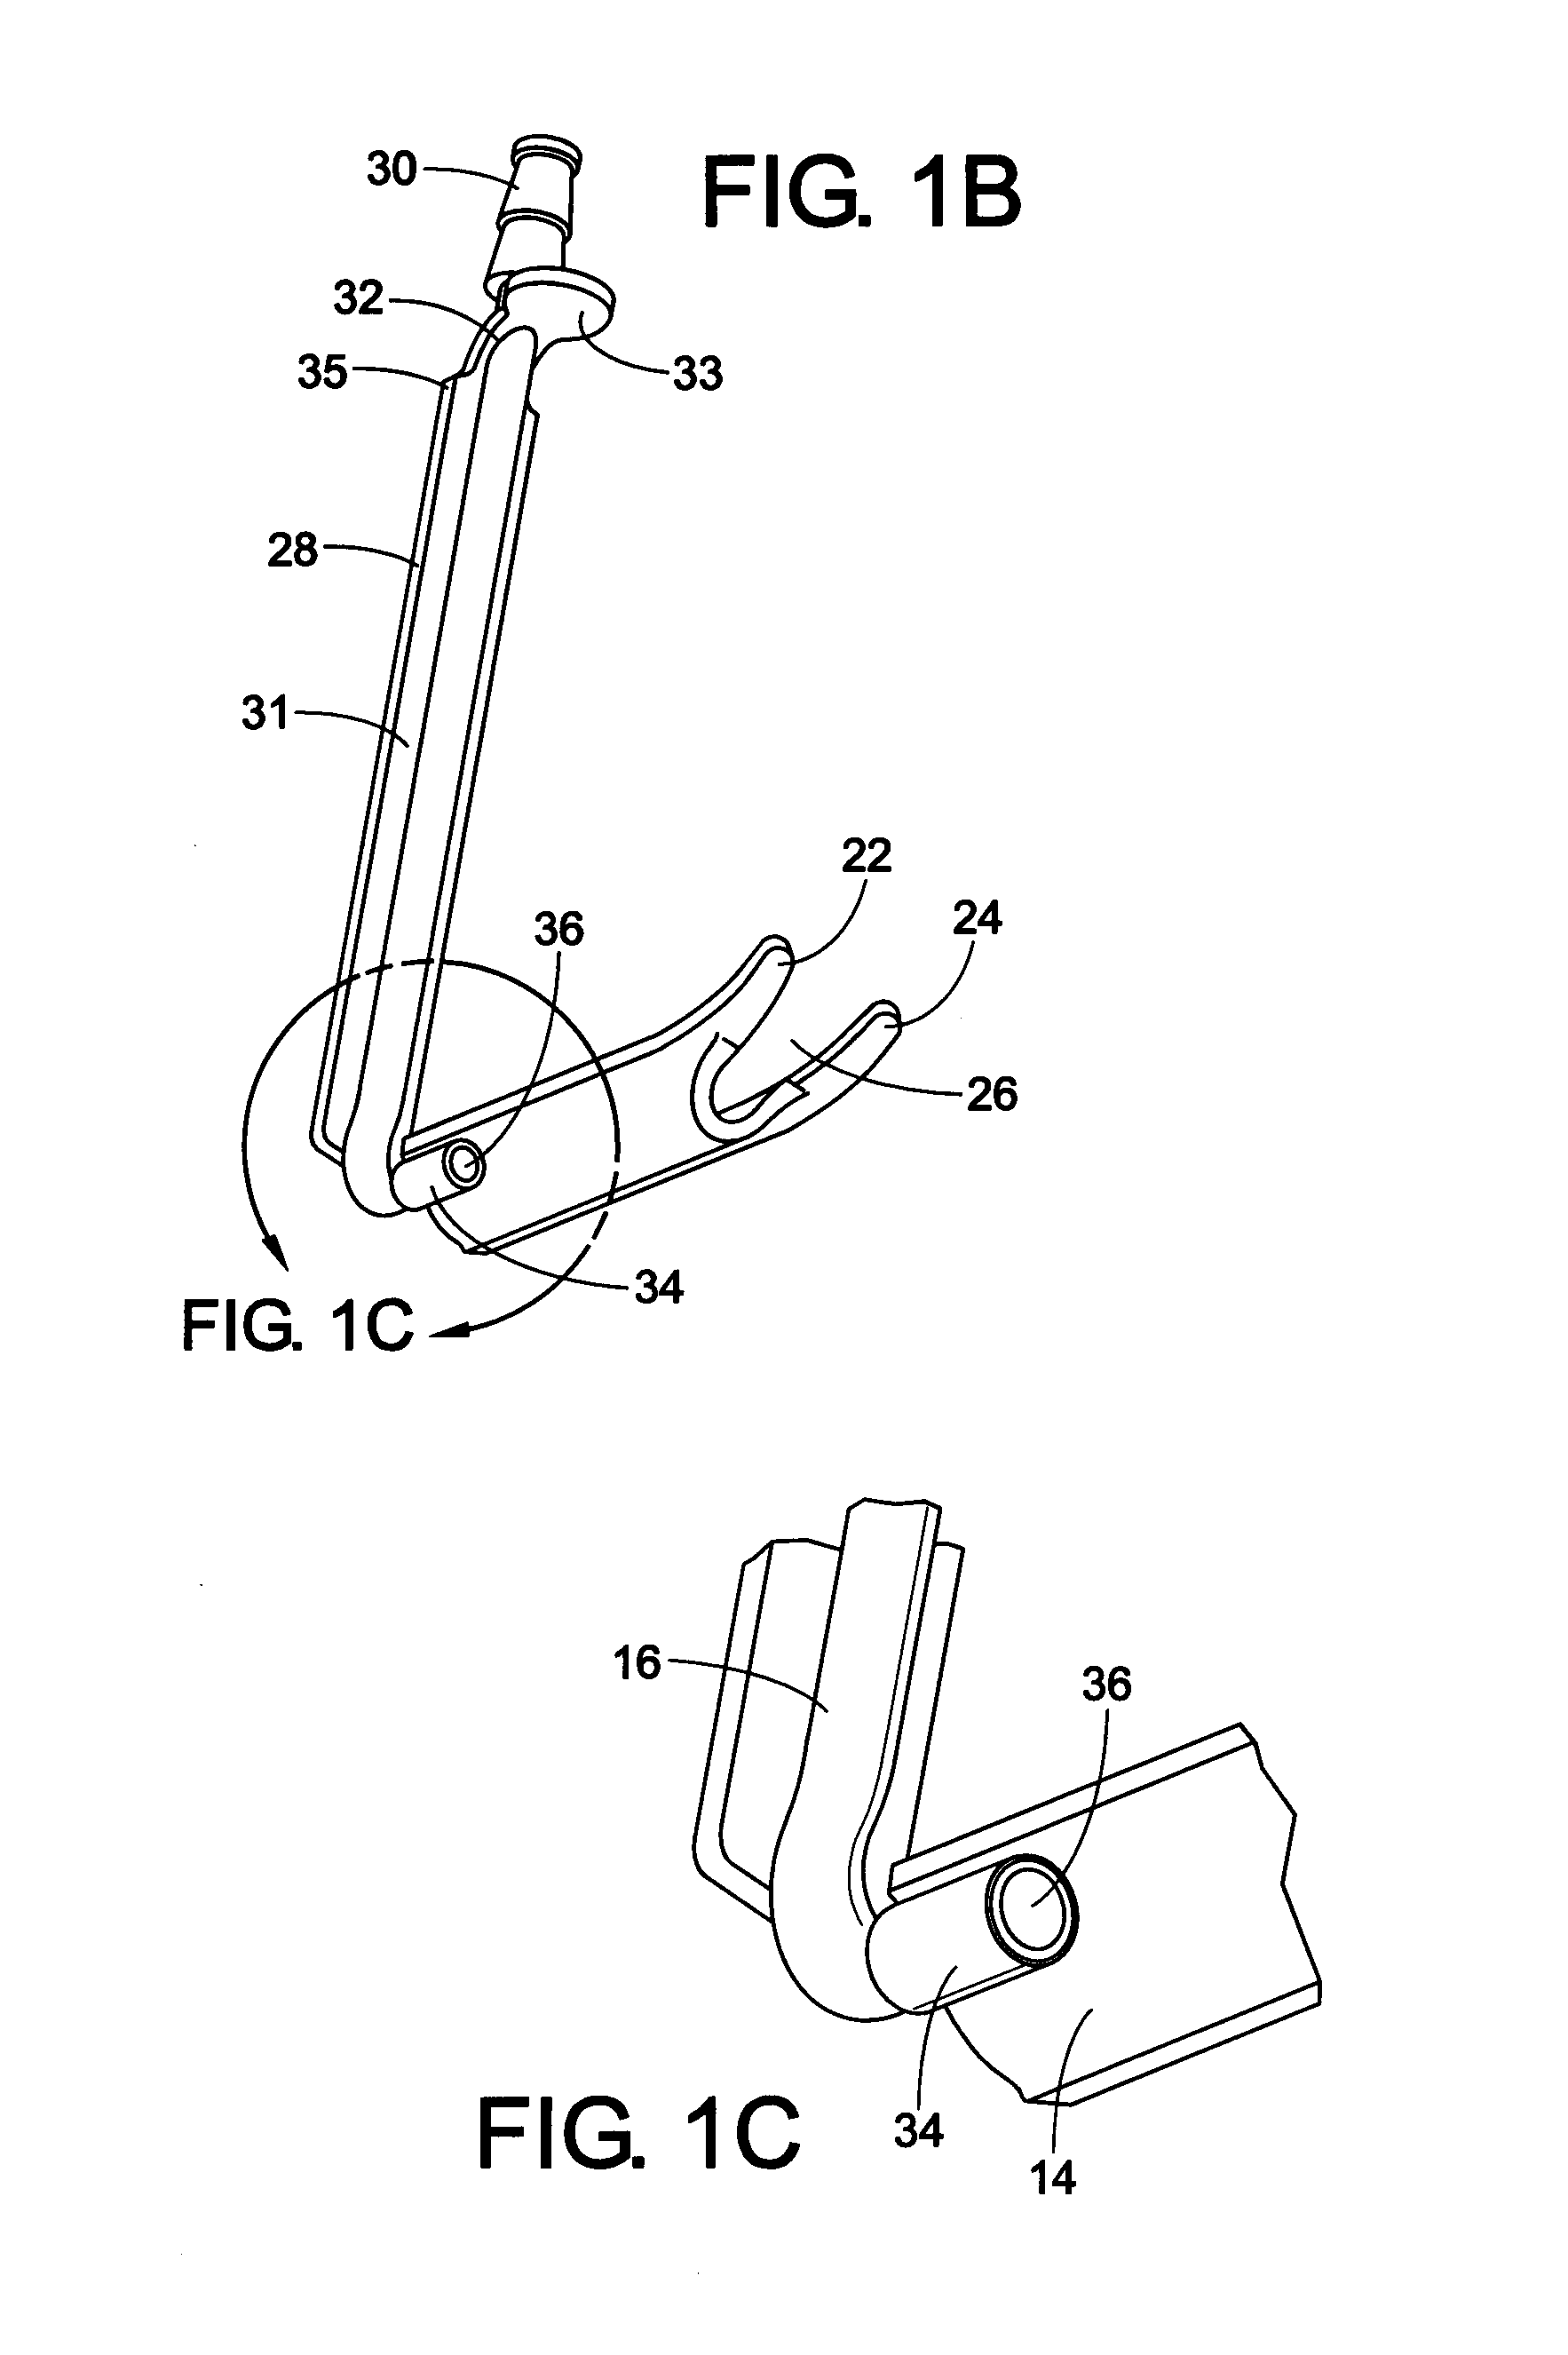 Suction device for evacuating fumes